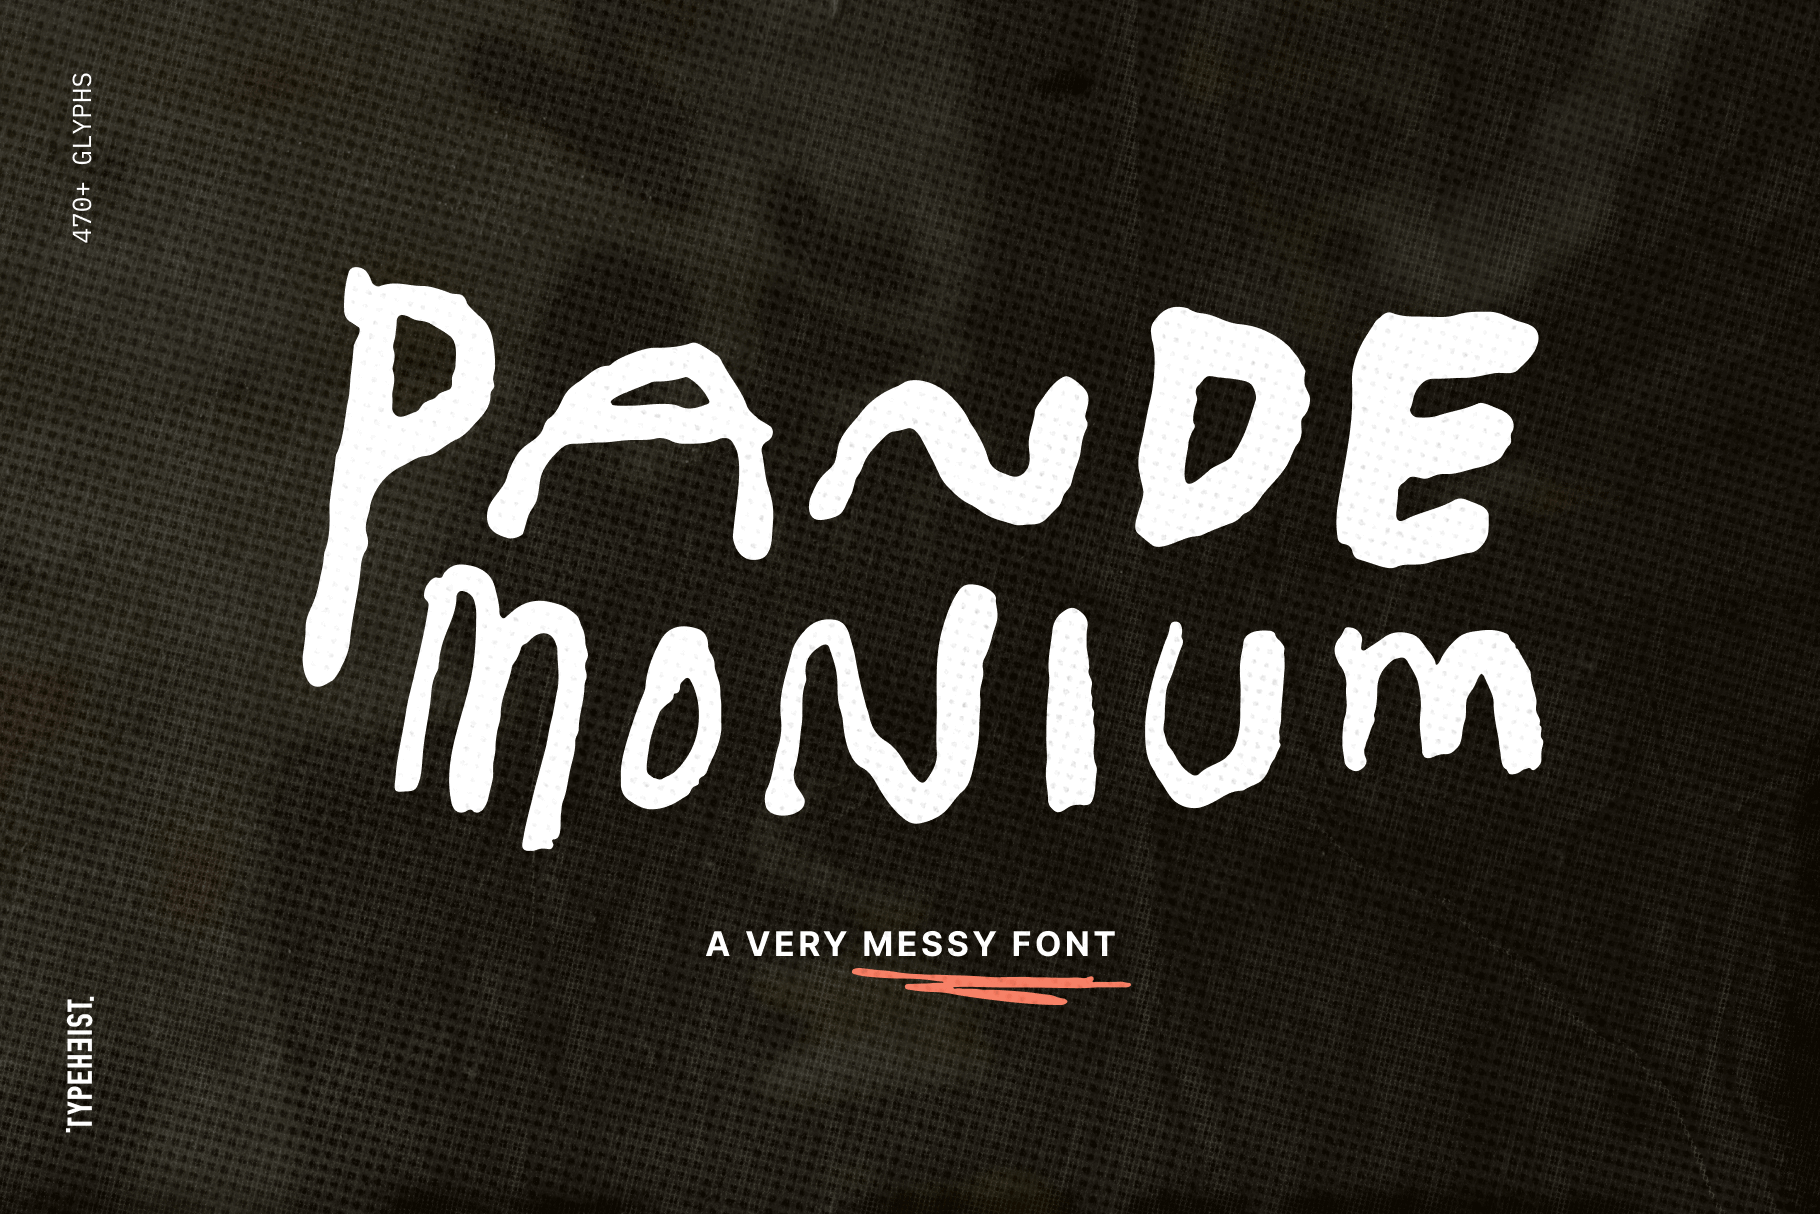 Pandemonium: "Wild uproar, unrestrained disorder; tumult or chaos". True to its name, Pandemonium font is exactly that: wild, chaotic and super erratic.